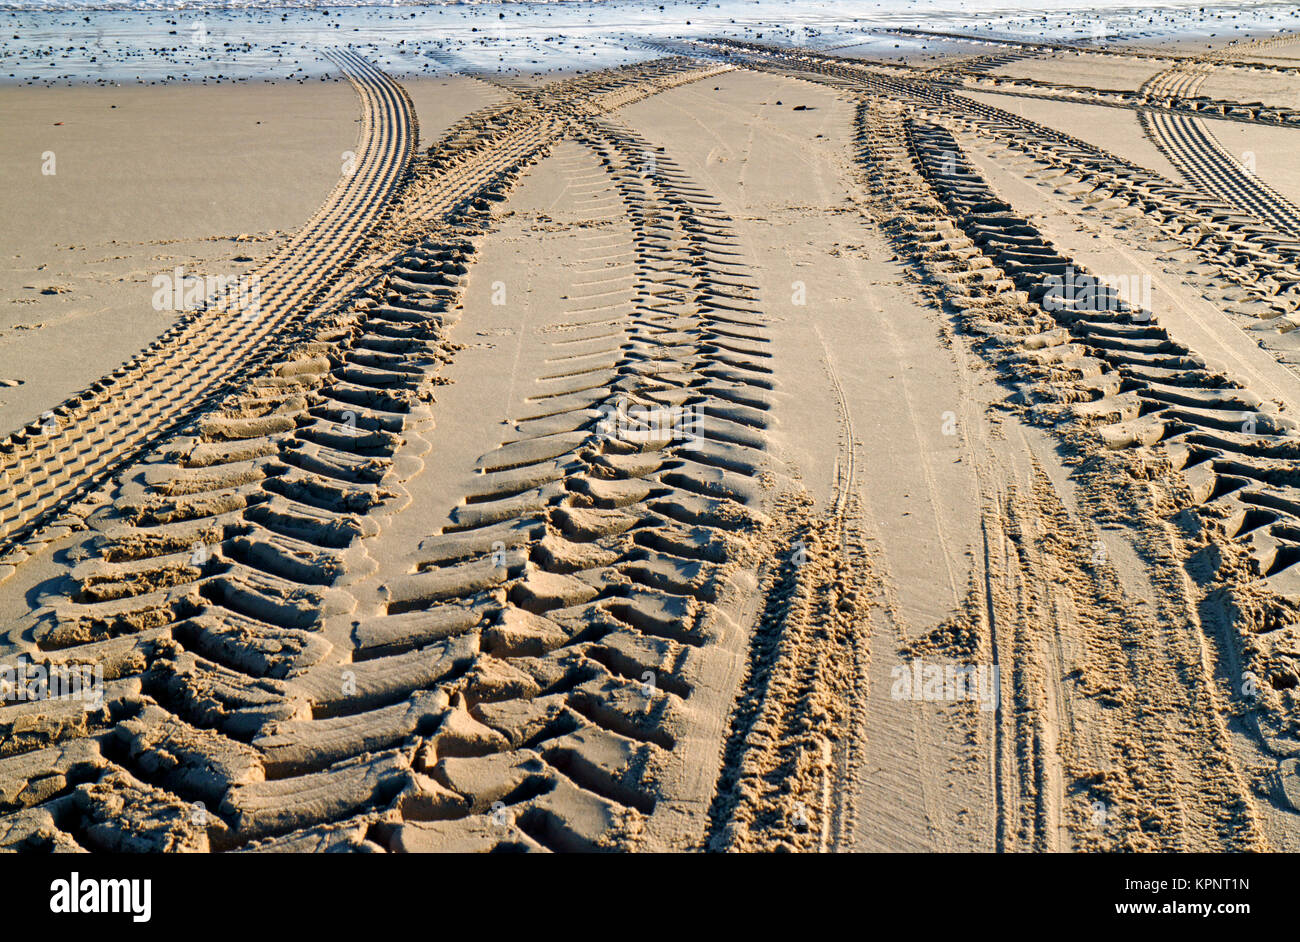 A view of tractor and trailer tyre marks in the sand on the beach at Sea Palling, Norfolk, England, United Kingdom. Stock Photo